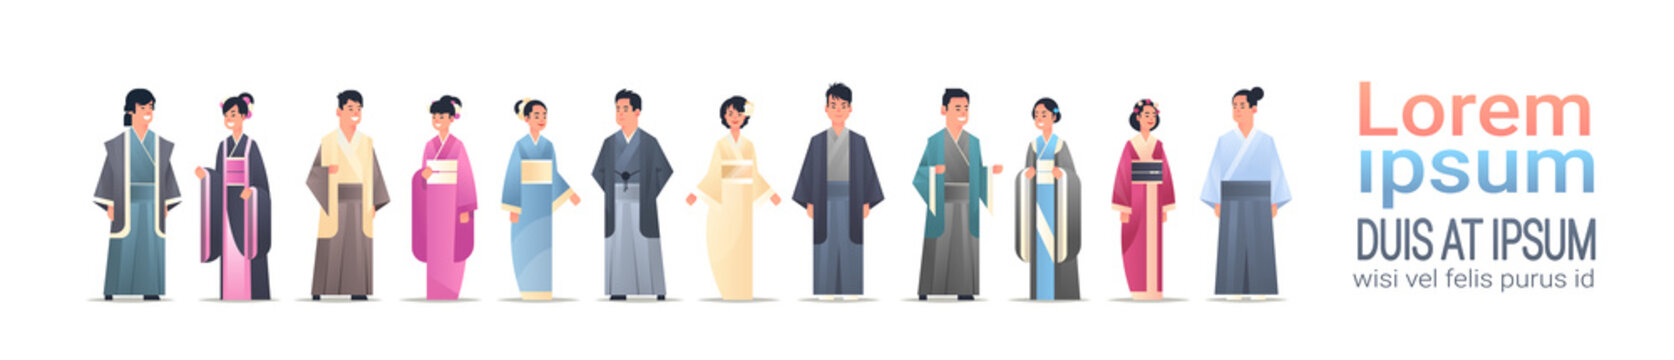 set asian men women wearing traditional clothes people in national ancient costumes standing pose chinese or japanese male female cartoon characters full length flat horizontal copy space